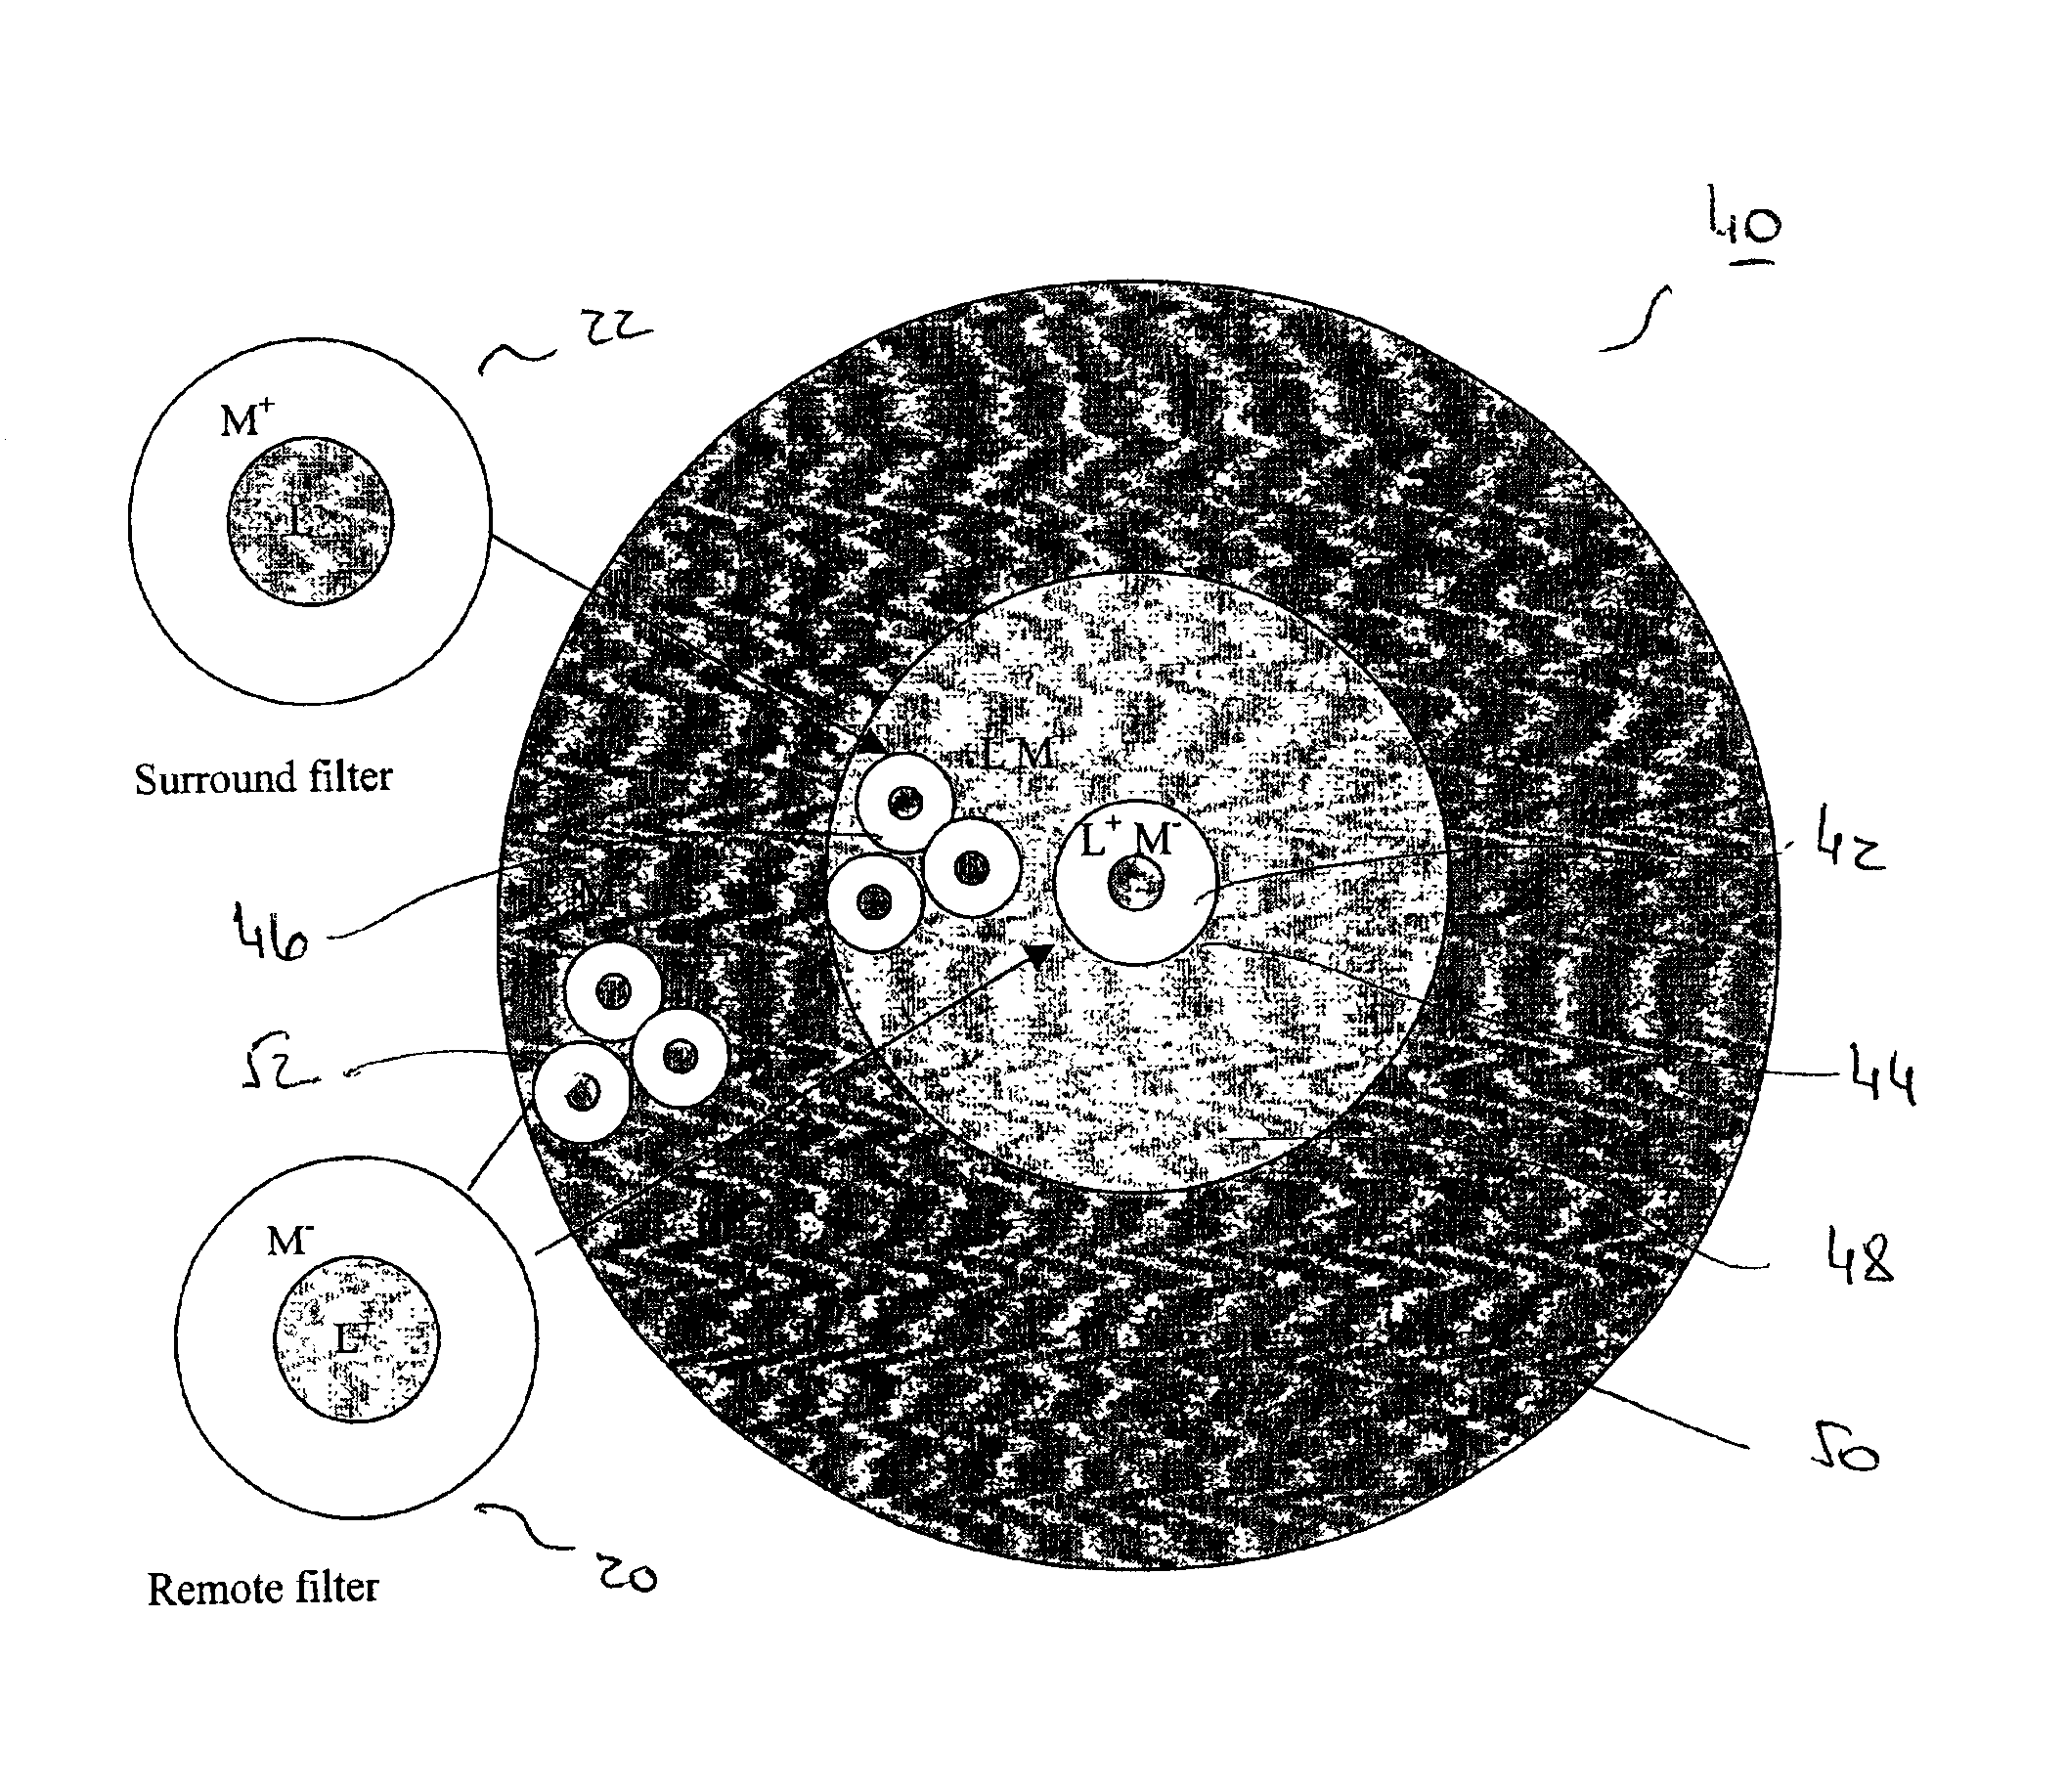 Method for automatic color and intensity contrast adjustment of still and video images